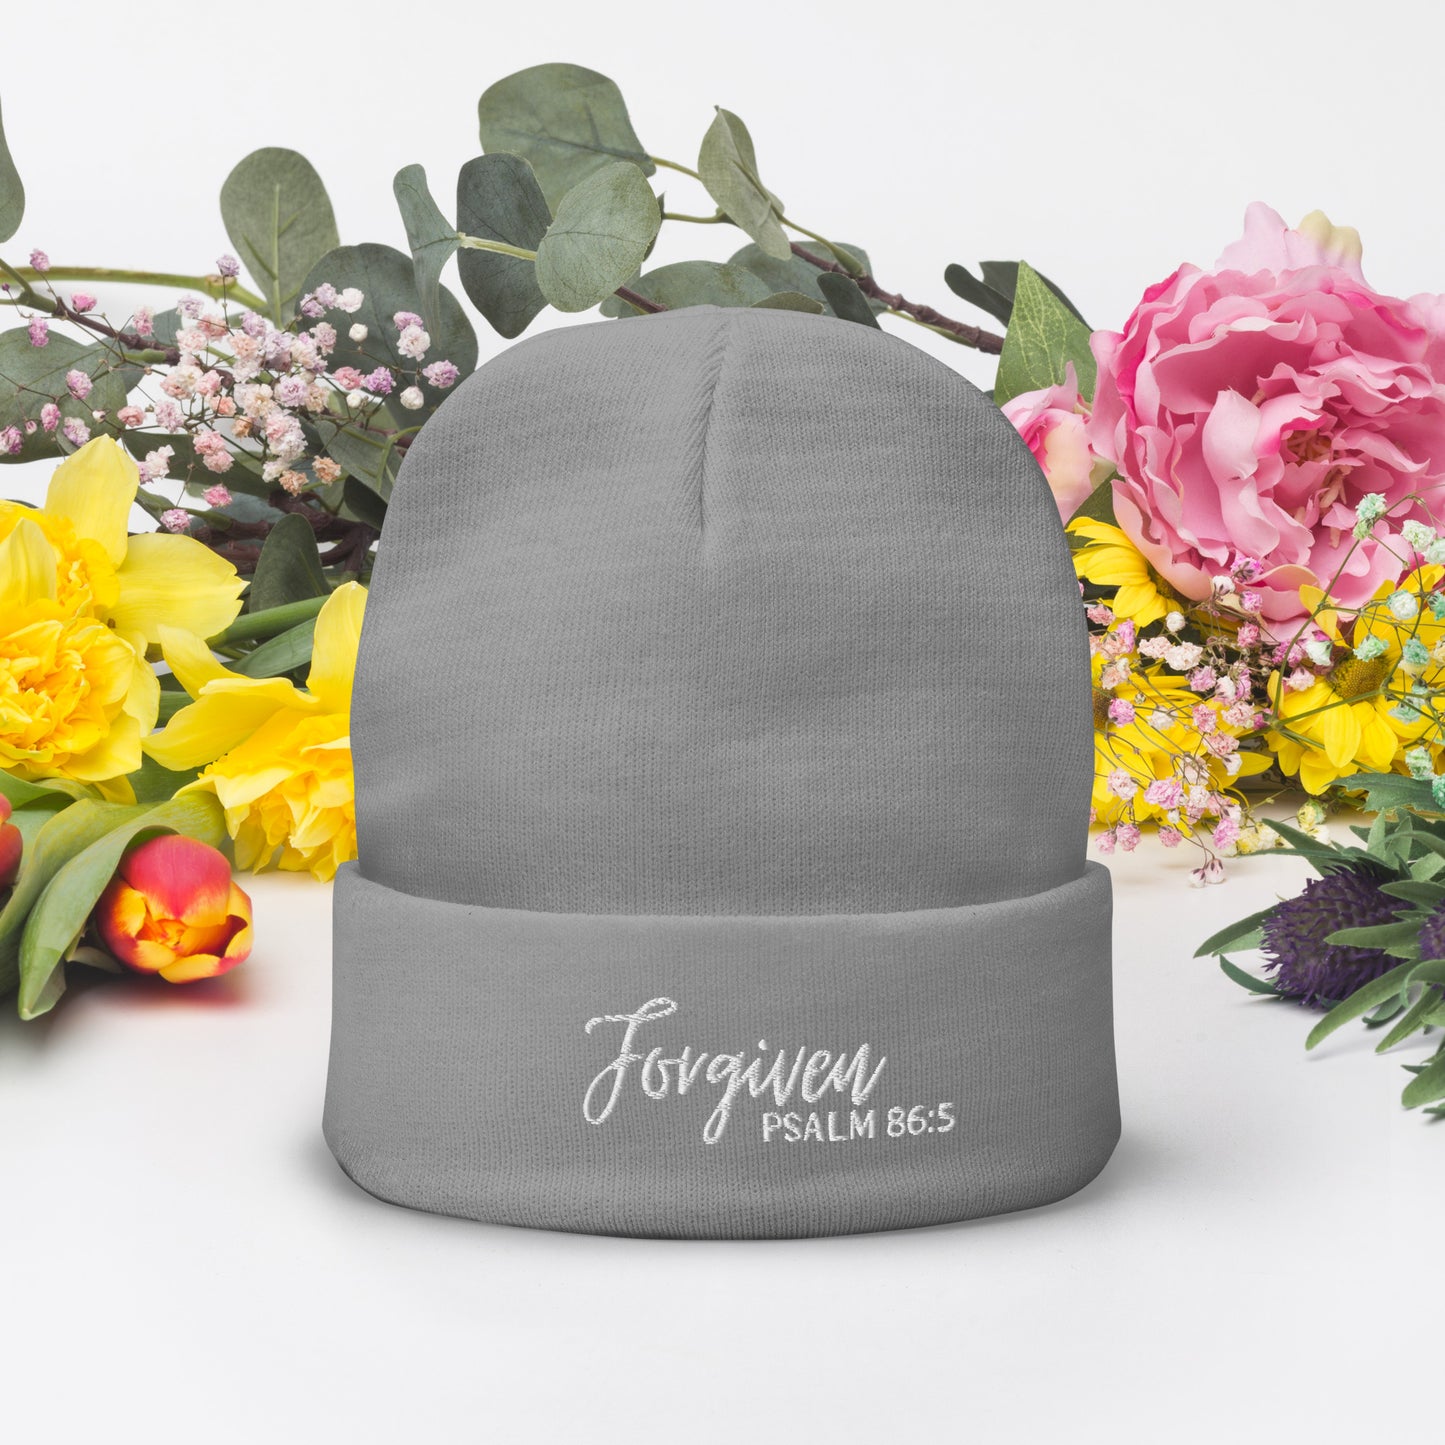 Forgiven Embroidered Beanie